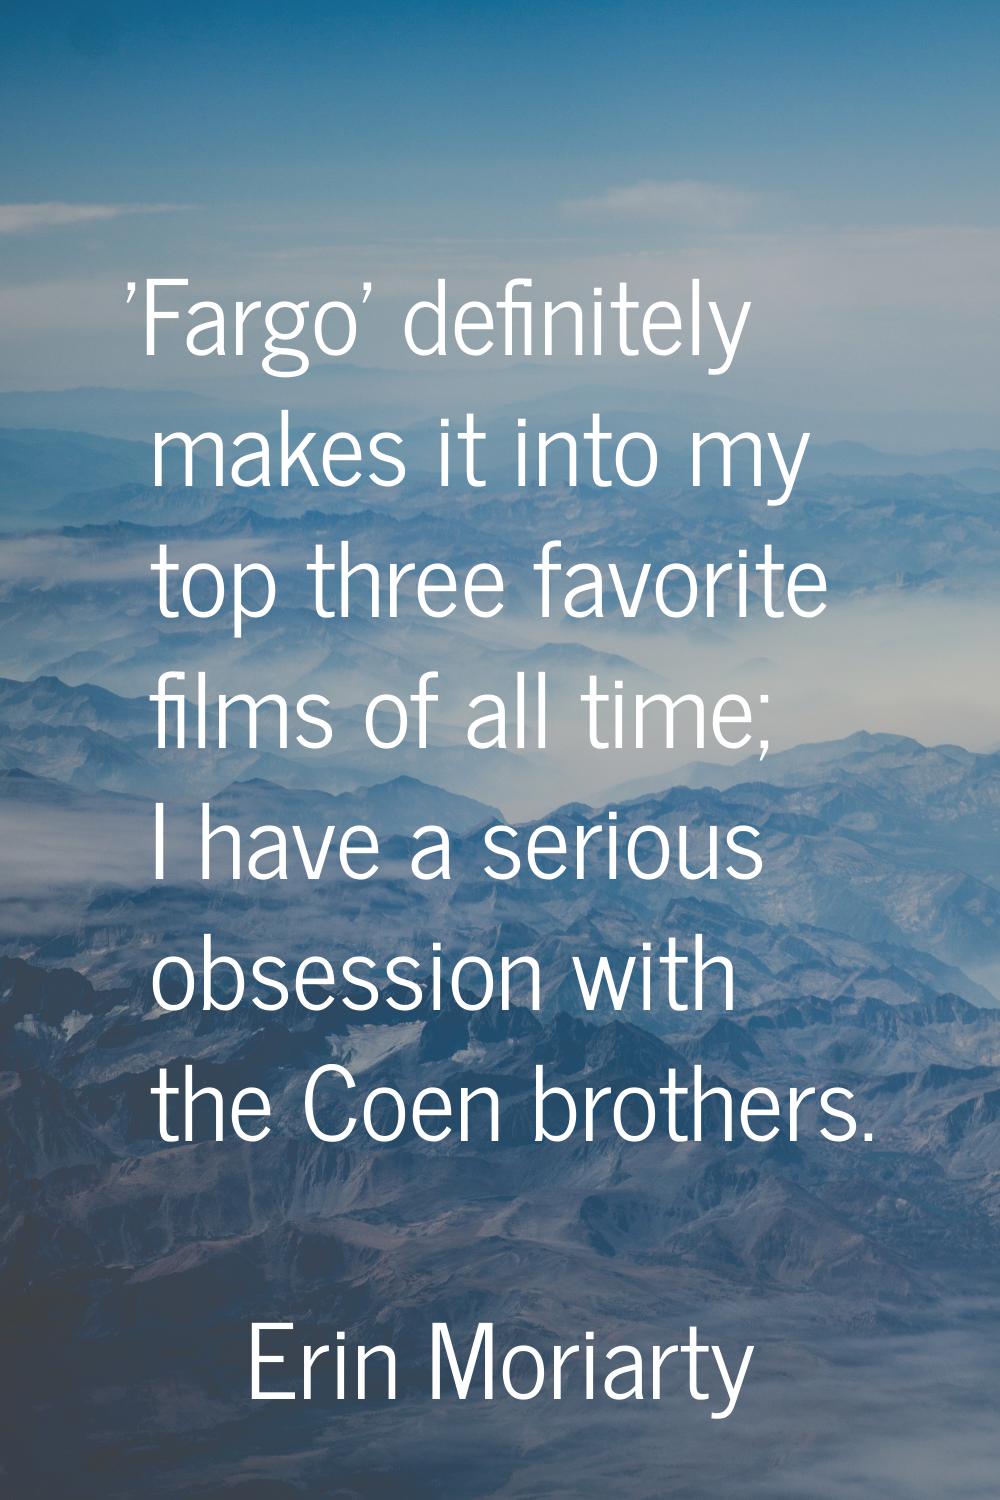 'Fargo' definitely makes it into my top three favorite films of all time; I have a serious obsessio